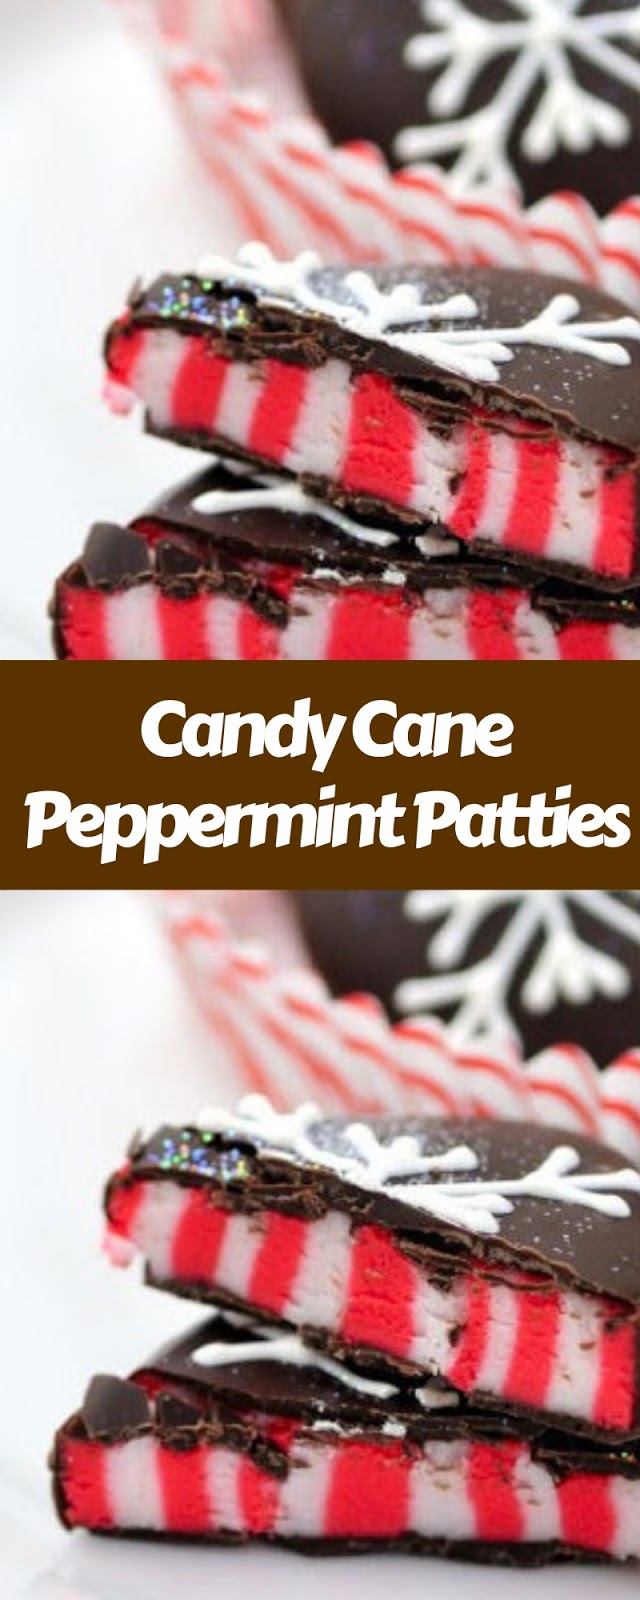 Candy Cane Peppermint Patties